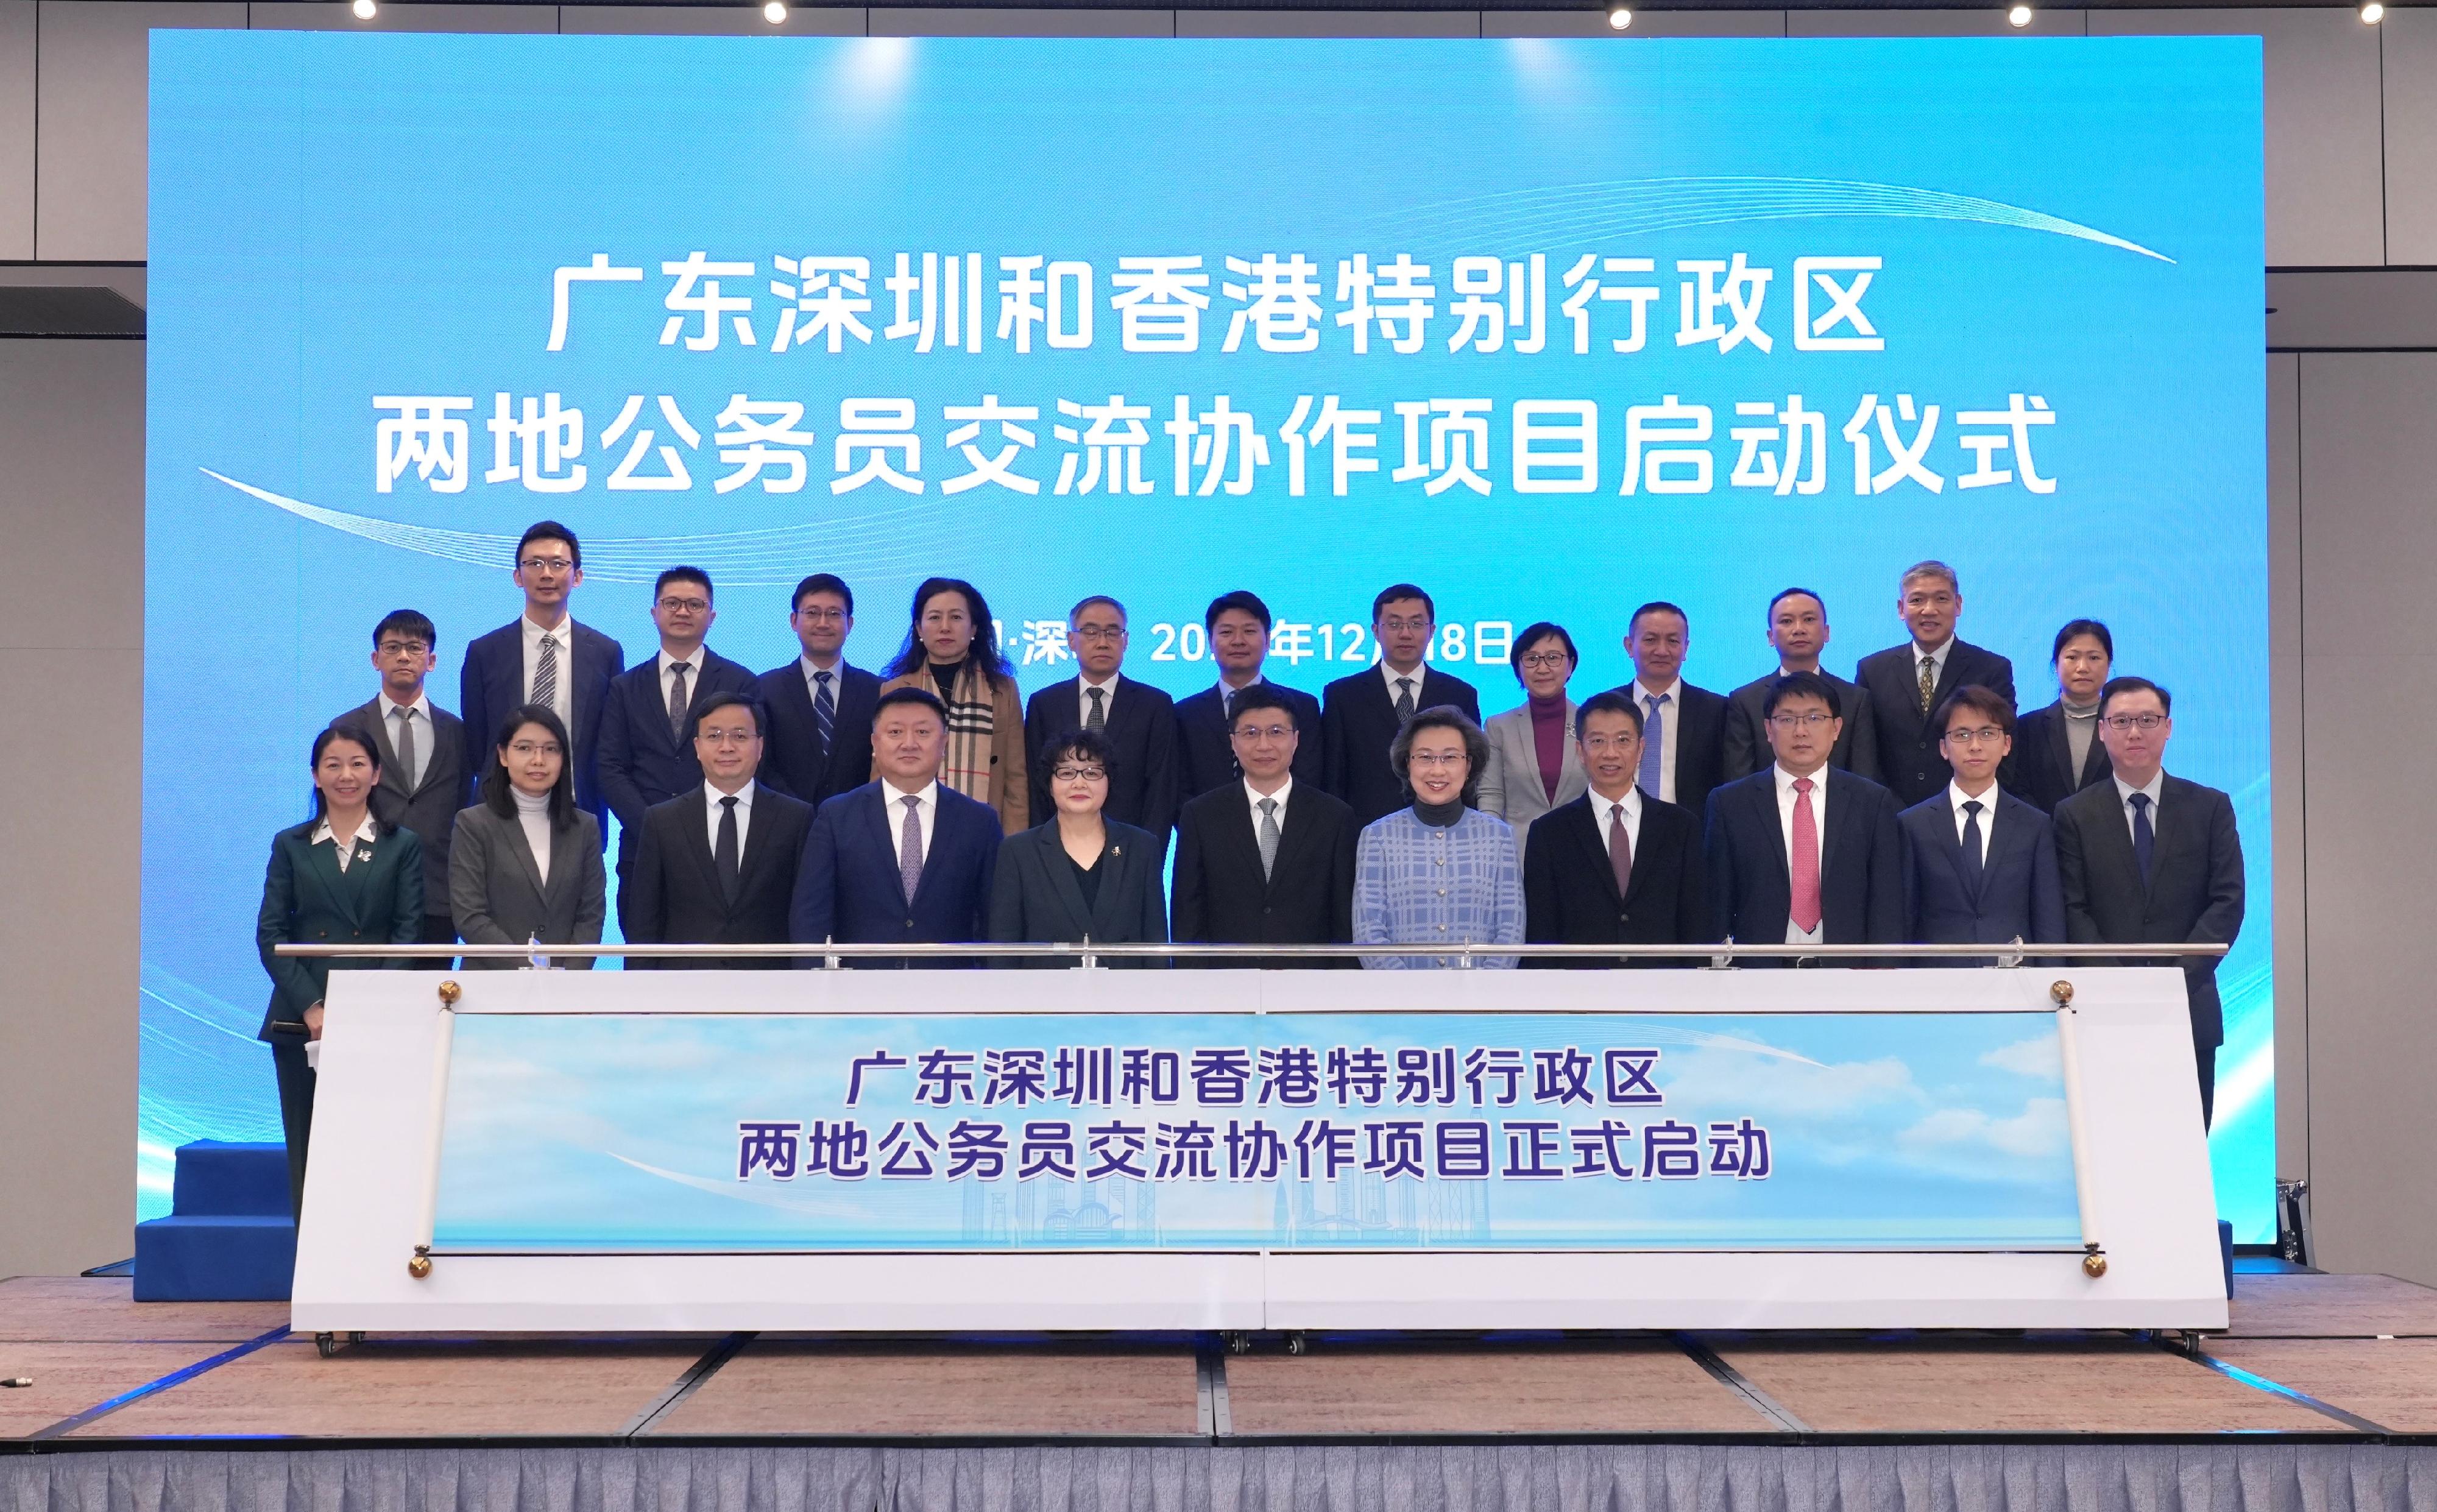 The Civil Service Staff Exchange and Collaboration Programme, jointly organised by the Hong Kong Special Administrative Region Government and the Mainland municipalities in the Guangdong-Hong Kong-Macao Greater Bay Area, was launched in Shenzhen today (December 18). Photo shows (front row, from fourth left) the Director General of the Hong Kong and Macao Affairs Office (HKMAO) of the Shenzhen Municipal People's Government, Mr Jiang Likun; the Director General of the HKMAO of the People's Government of Guangdong Province, Ms Li Huanchun; Member of the Standing Committee of the CPC Shenzhen Municipal Committee and Director General of the Organization Department of the CPC Shenzhen Municipal Committee, Mr Cheng Buyi; the Secretary for the Civil Service, Mrs Ingrid Yeung; and the Permanent Secretary for the Civil Service, Mr Clement Leung, with other guests and the participating middle and senior-level Hong Kong civil servants.